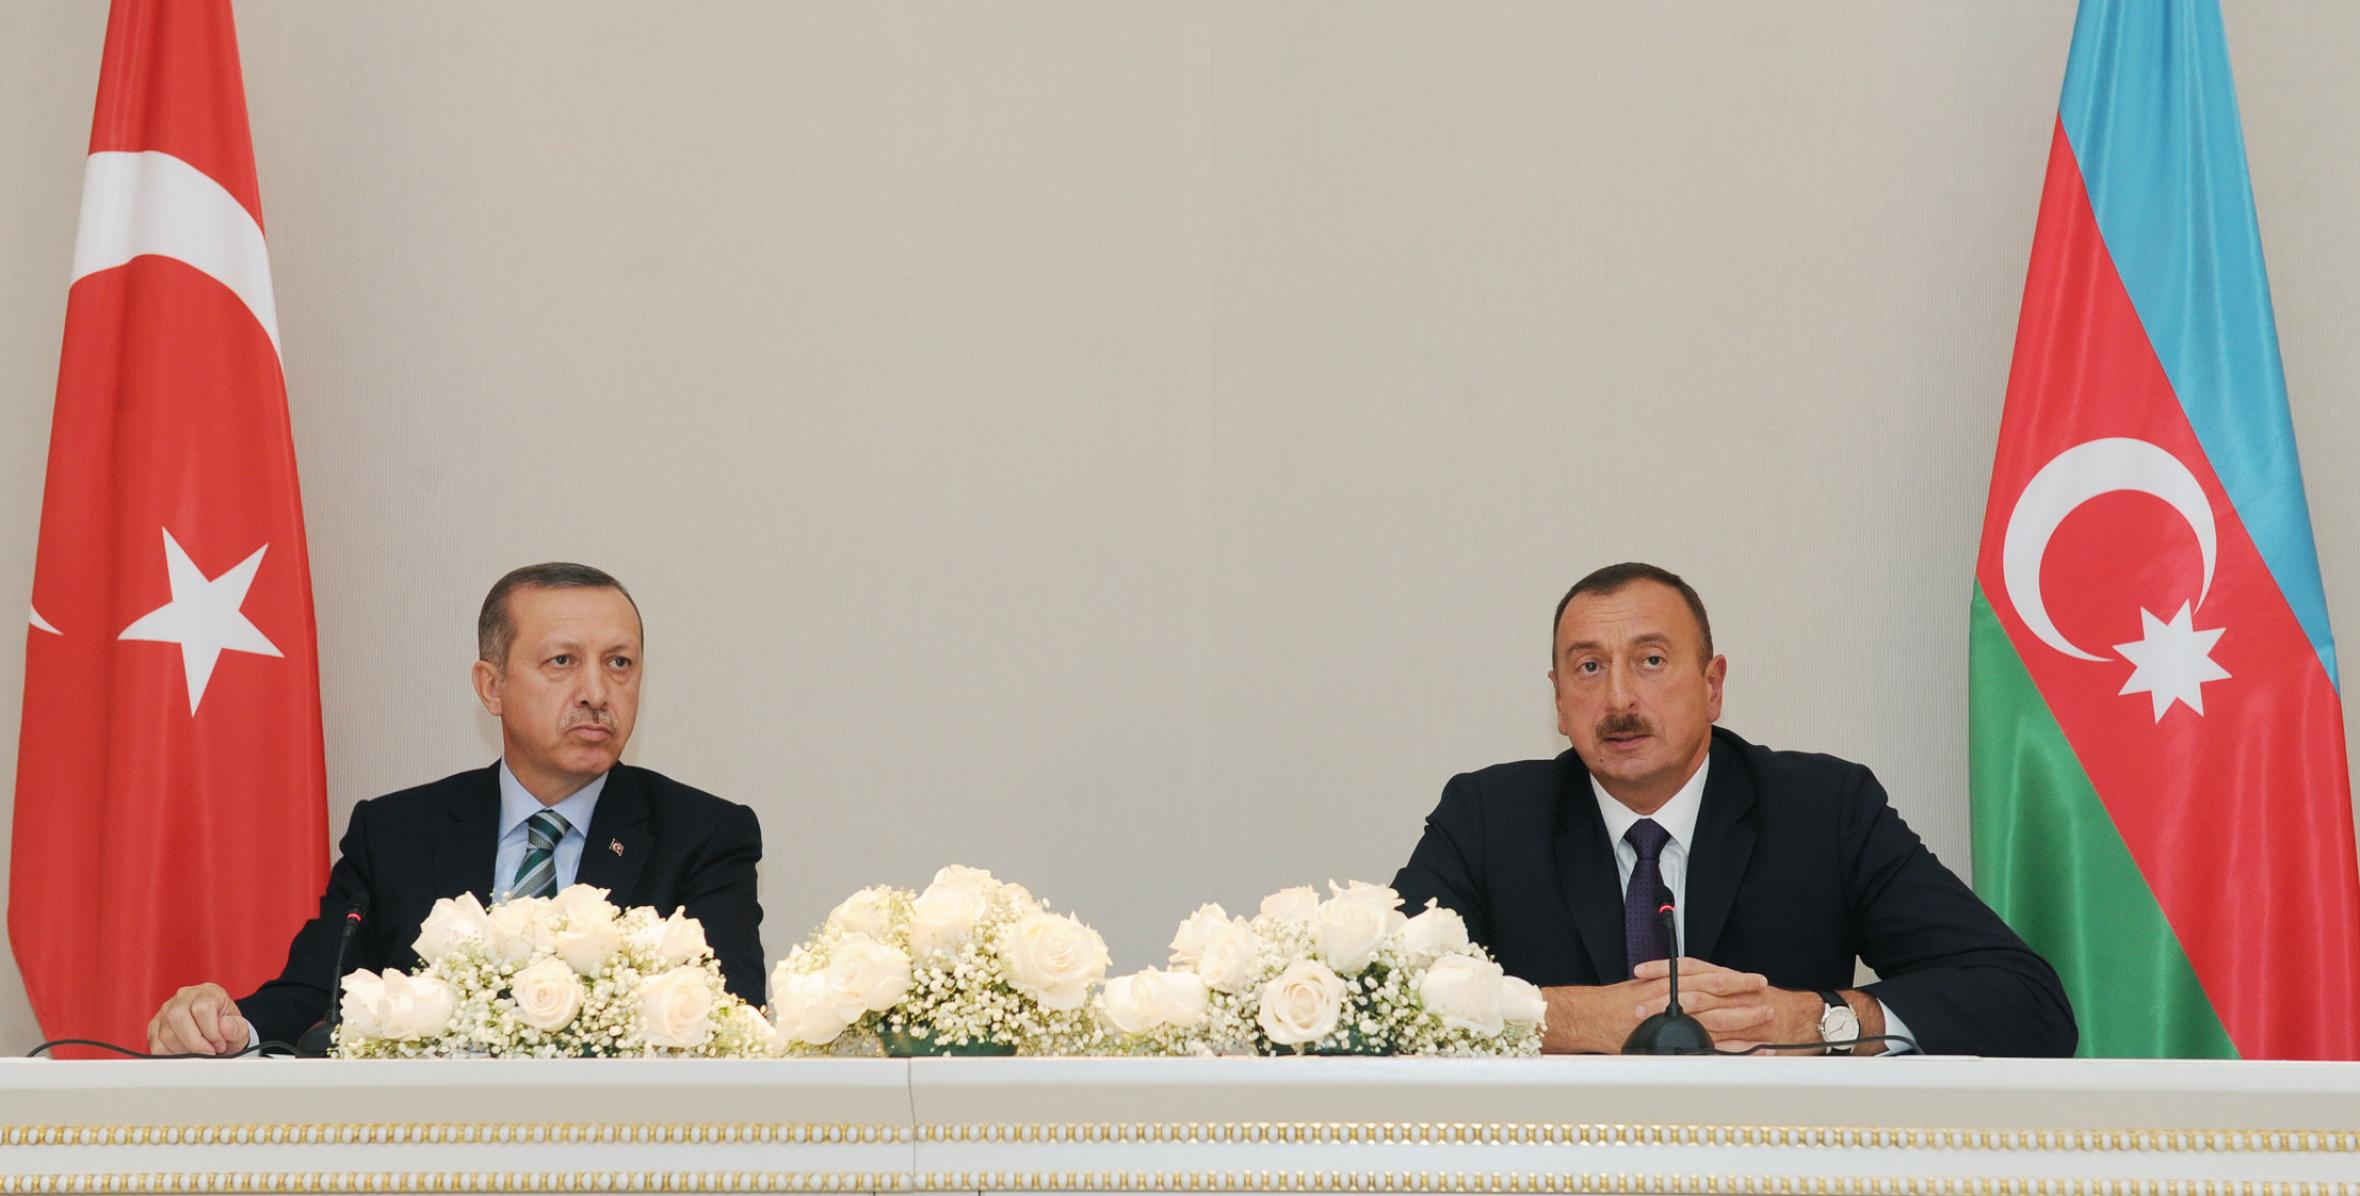 Joint press conference of Ilham Aliyev and Turkish Prime Minister Recep Tayyip Erdogan was held